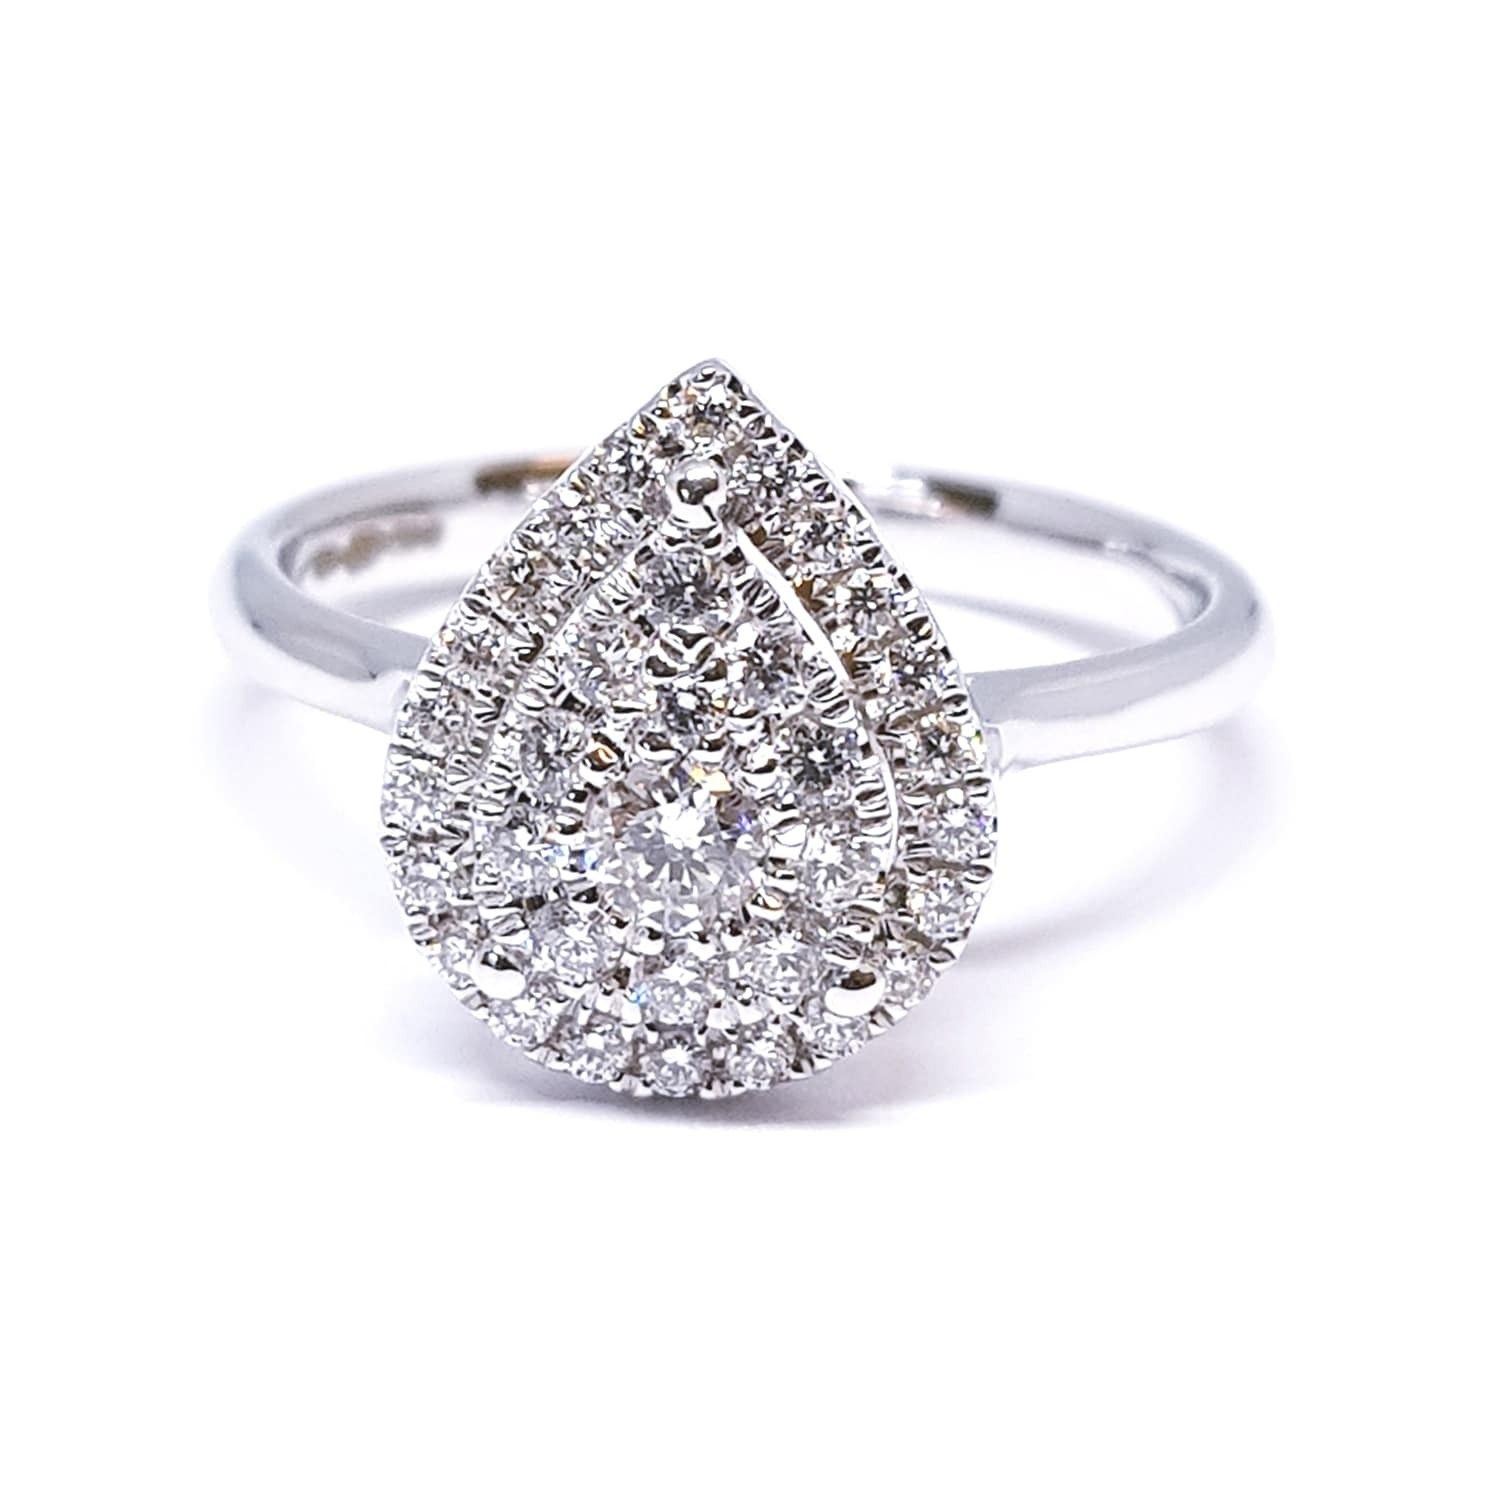 White Gold Pear Shaped Cluster Engagement Ring Throughout Pear Shaped Cluster Diamond Engagement Rings (View 14 of 25)